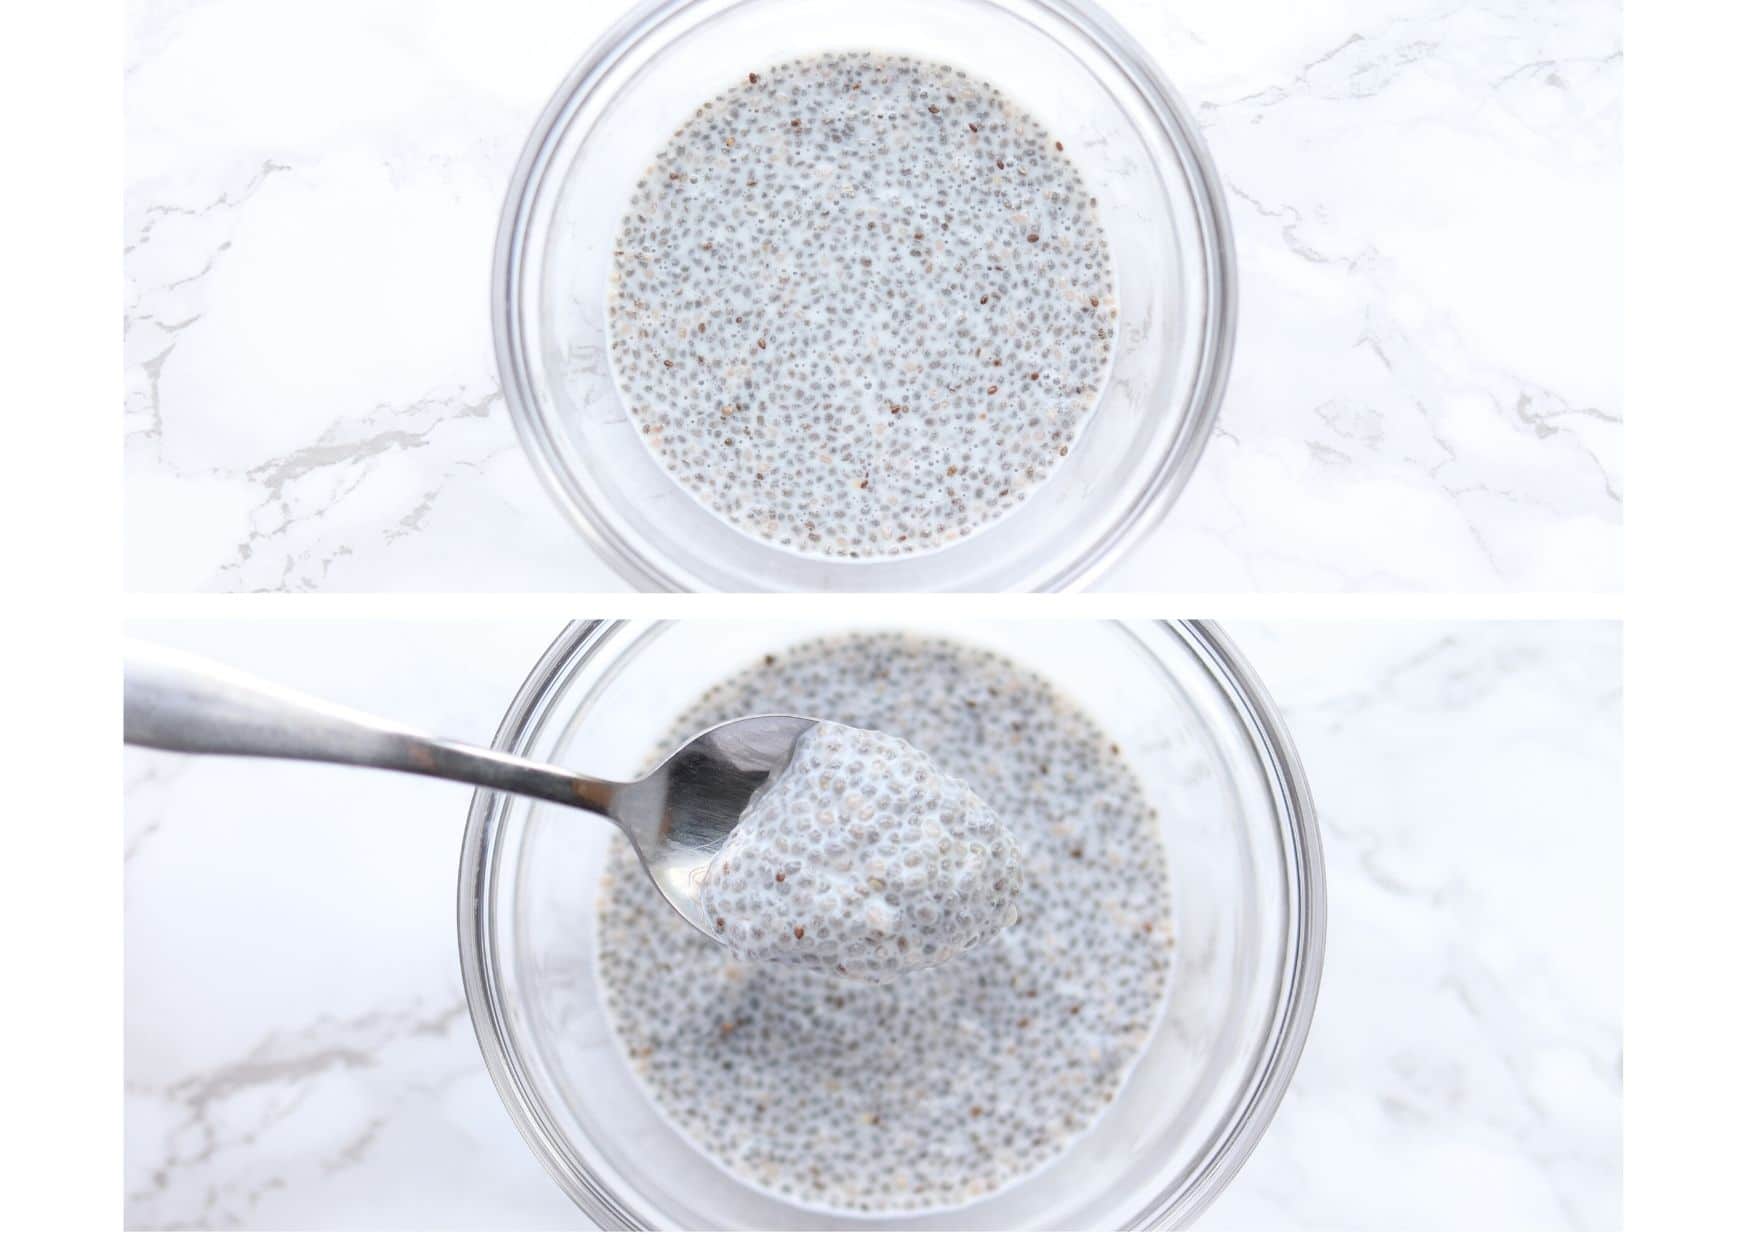 chia seeds soaking in almond milk and then scooped with a spoon as chia pudding